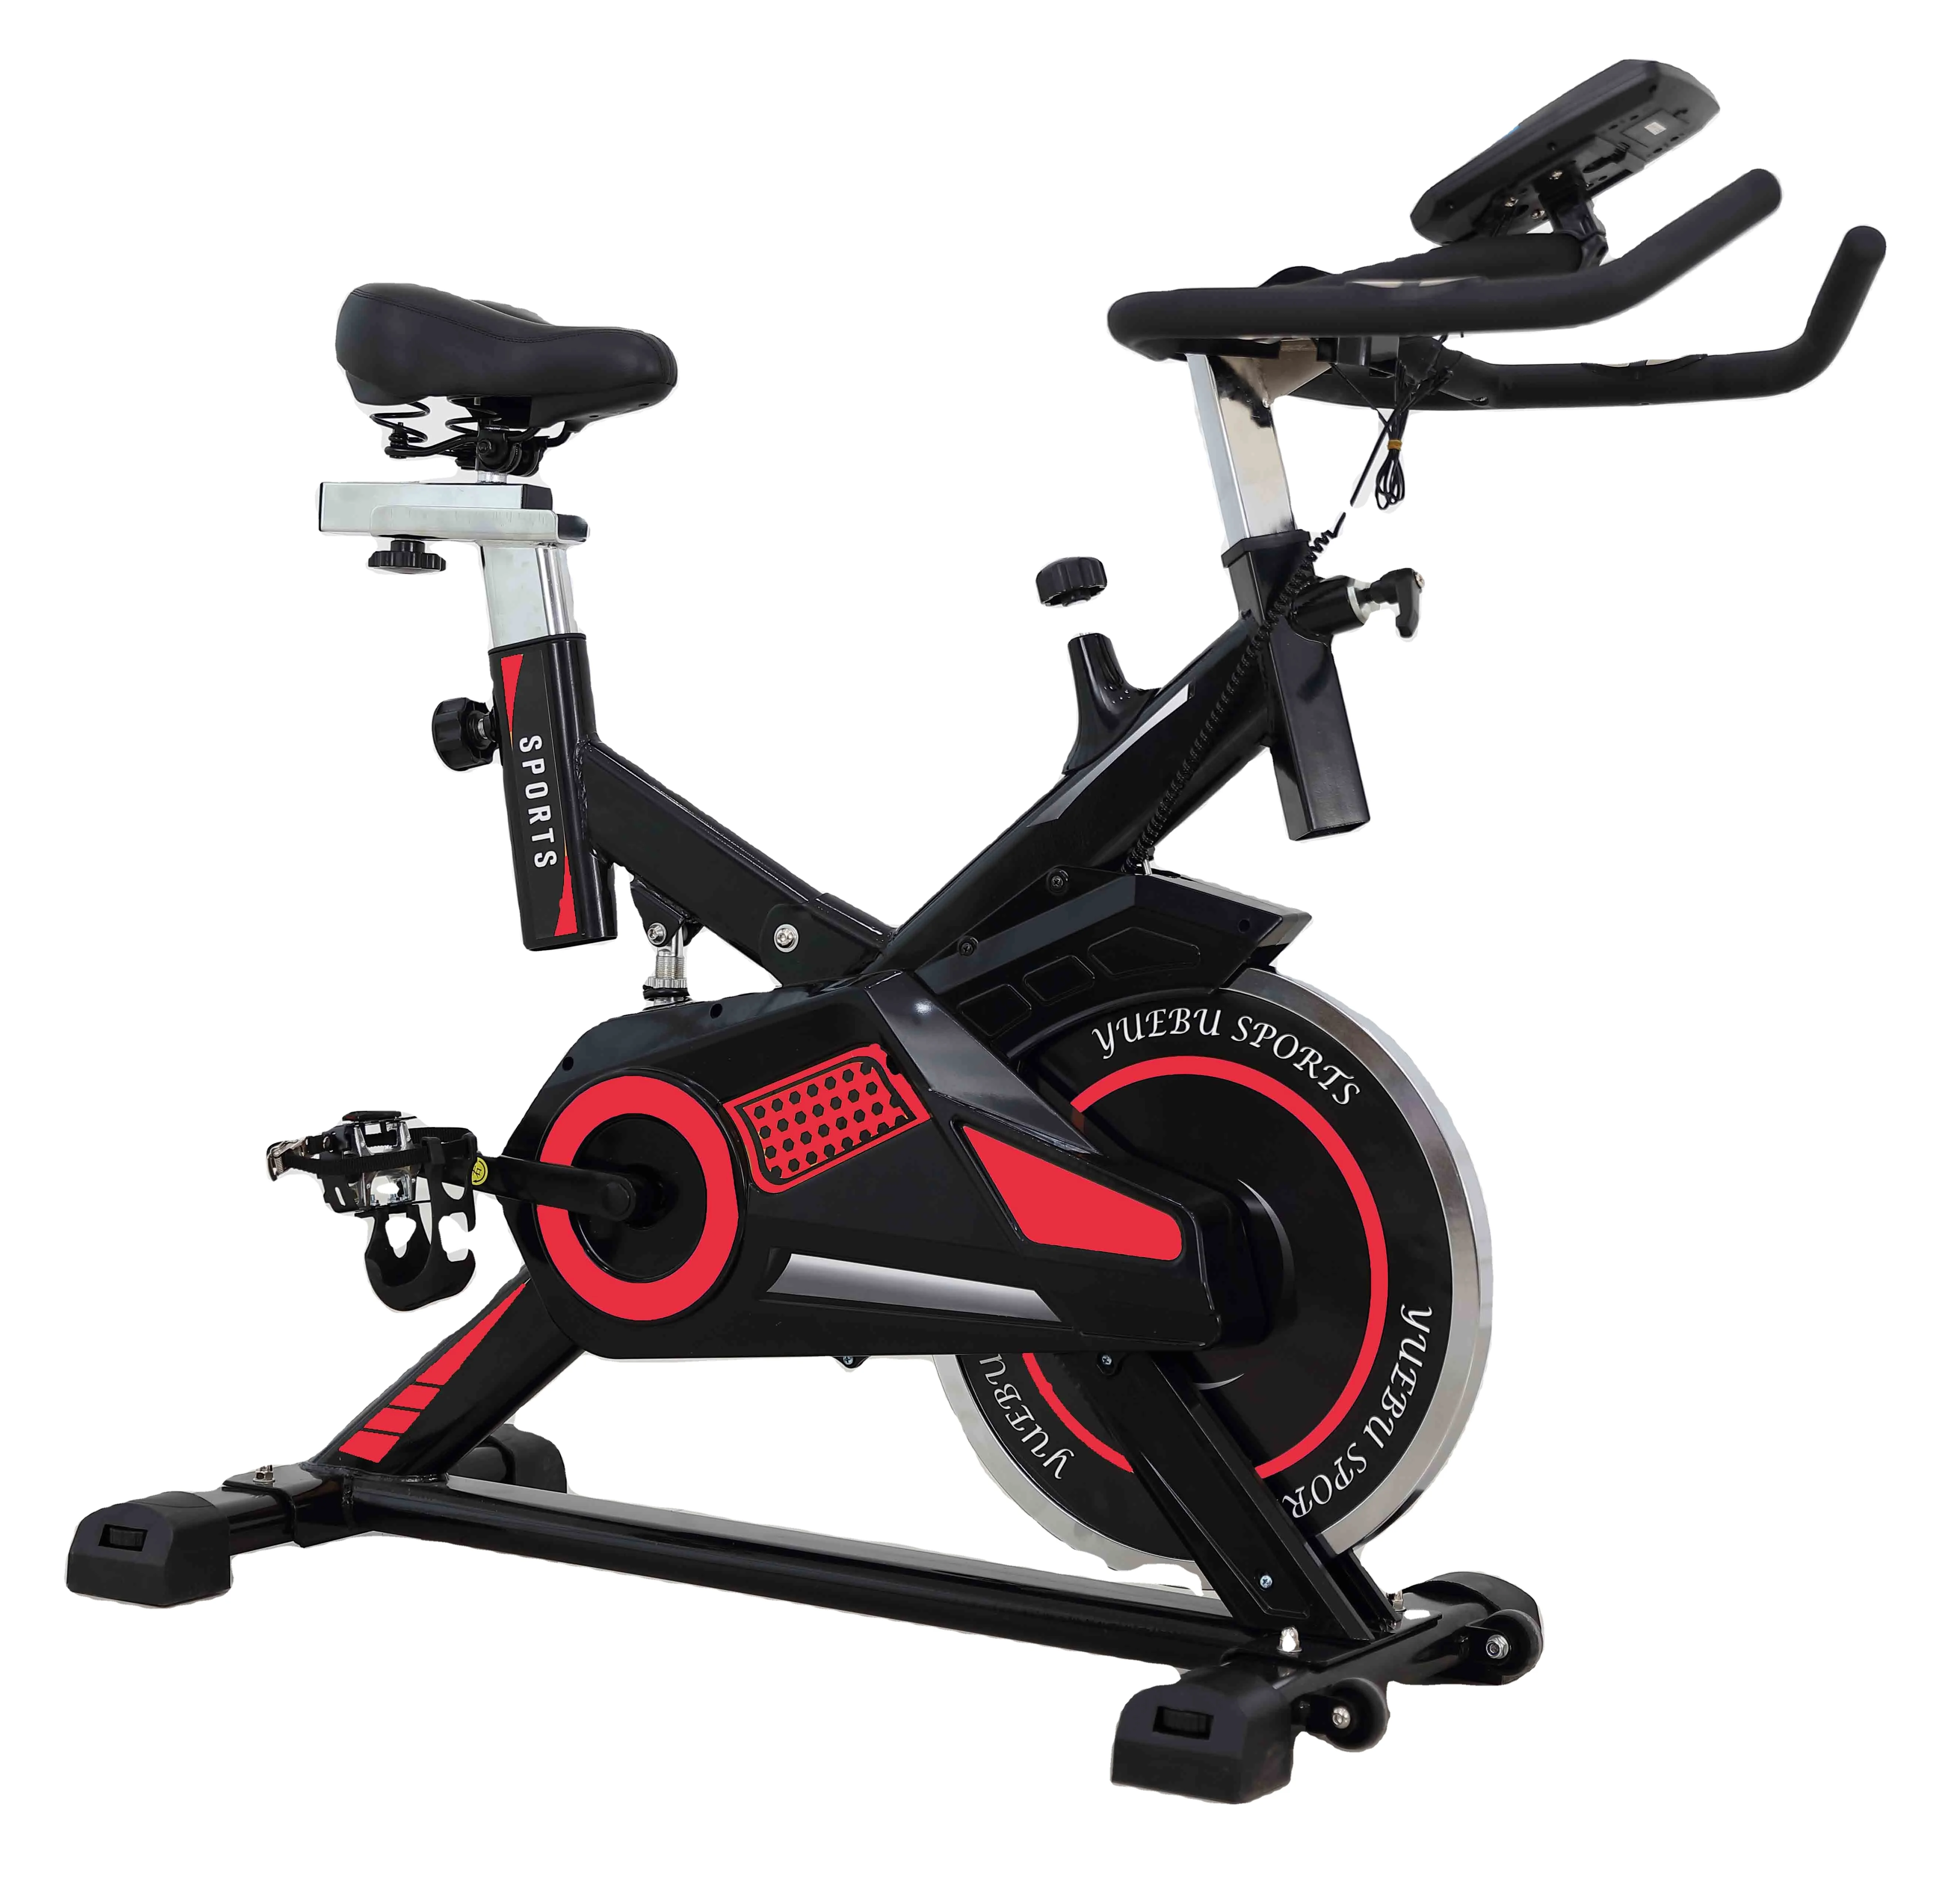 Indoor Pro Bicycle Cycling Fitness Exercise Stationary Bike Cardio Home Workout 